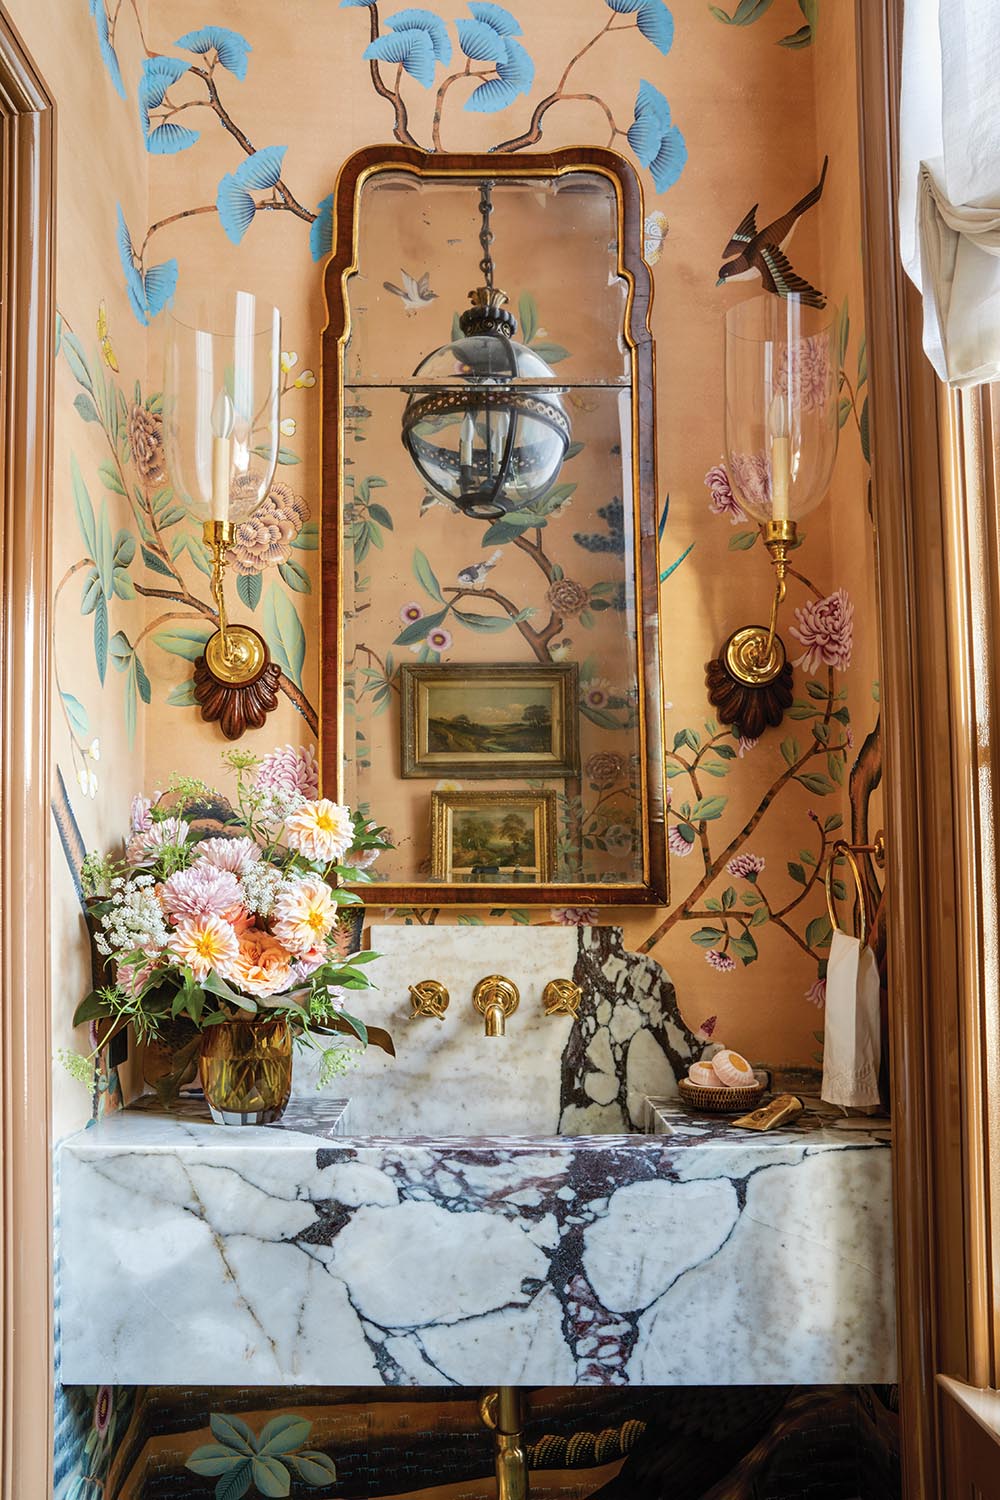 Marble sink in his powder room designed by Nina Long and Don Easterling at the Flower Atlanta showhouse